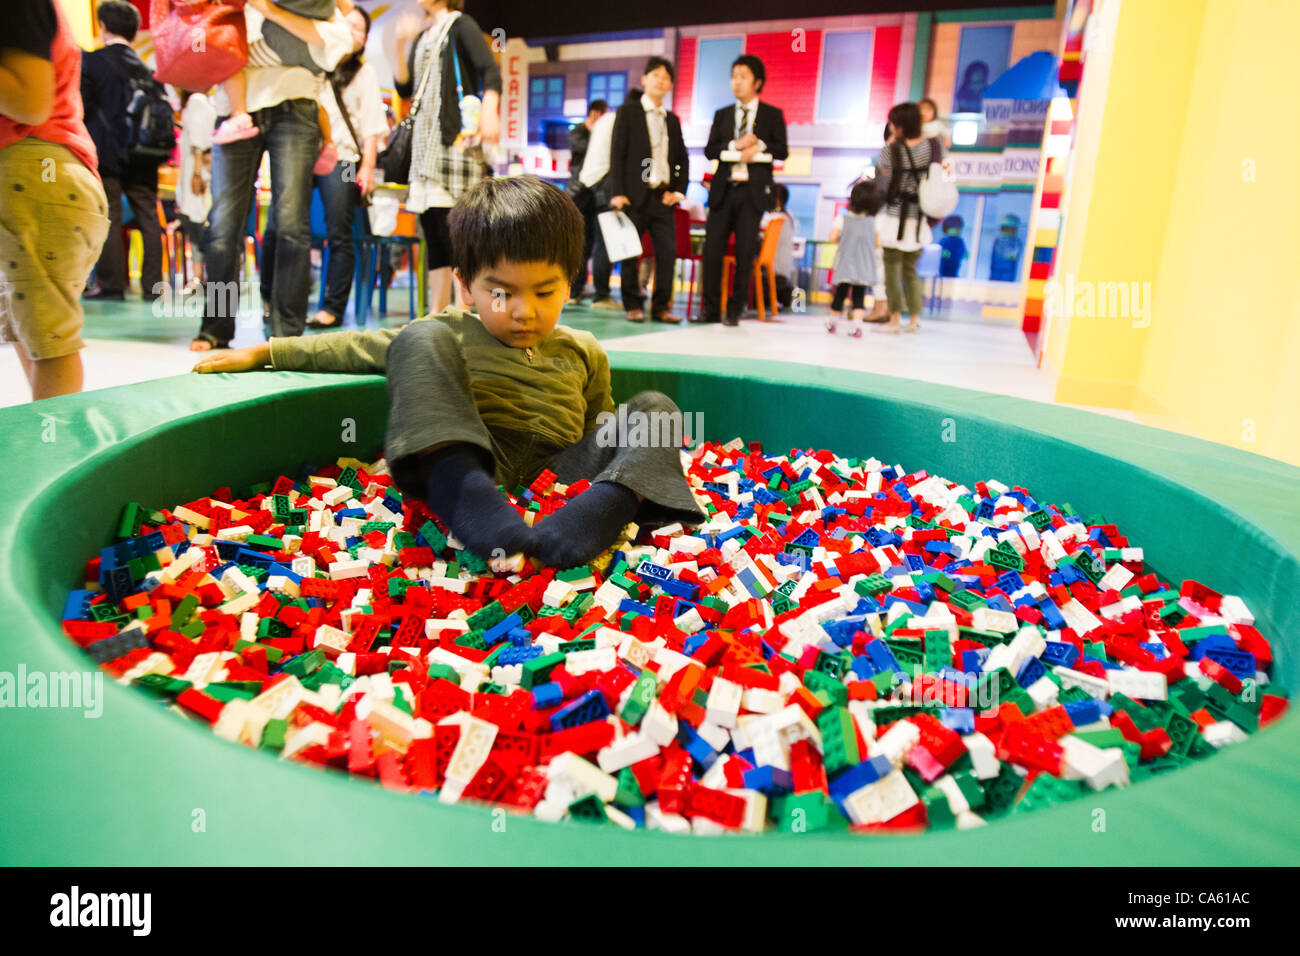 June 14, 2012, Tokyo, Japan - A young boy plays inside a pool of Lego bricks  during a press preview event at the LEGOLAND Discovery Center Tokyo. The  LEGOLAND Discovery Center contains